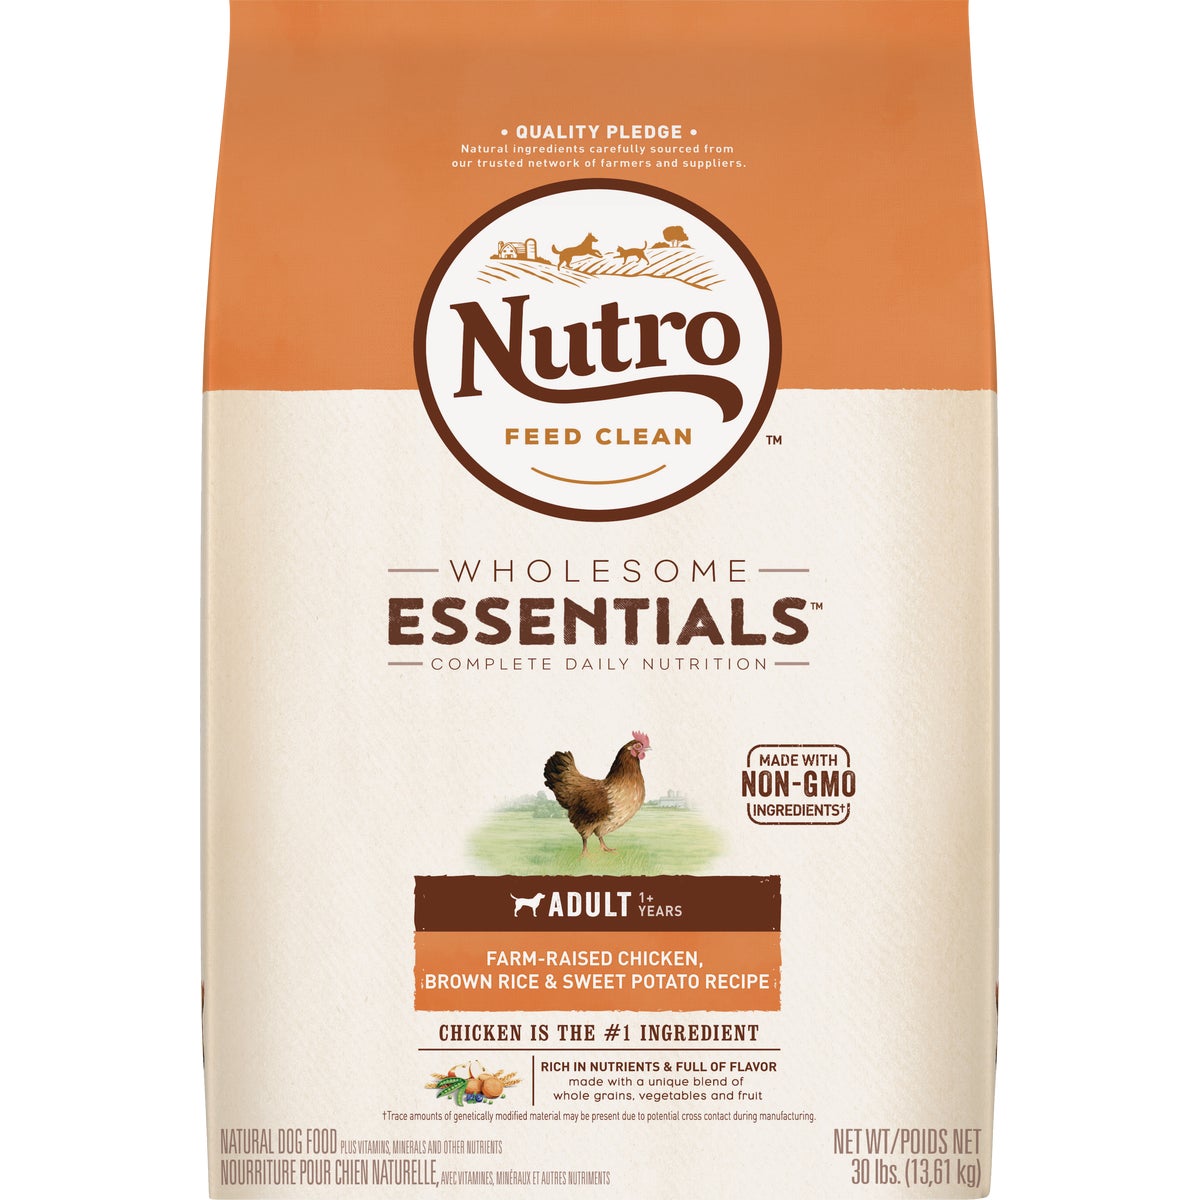 Nutro Wholesome Essentials 30 Lb. Chicken, Brown Rice, & Sweet Potato Adult Dry Dog Food